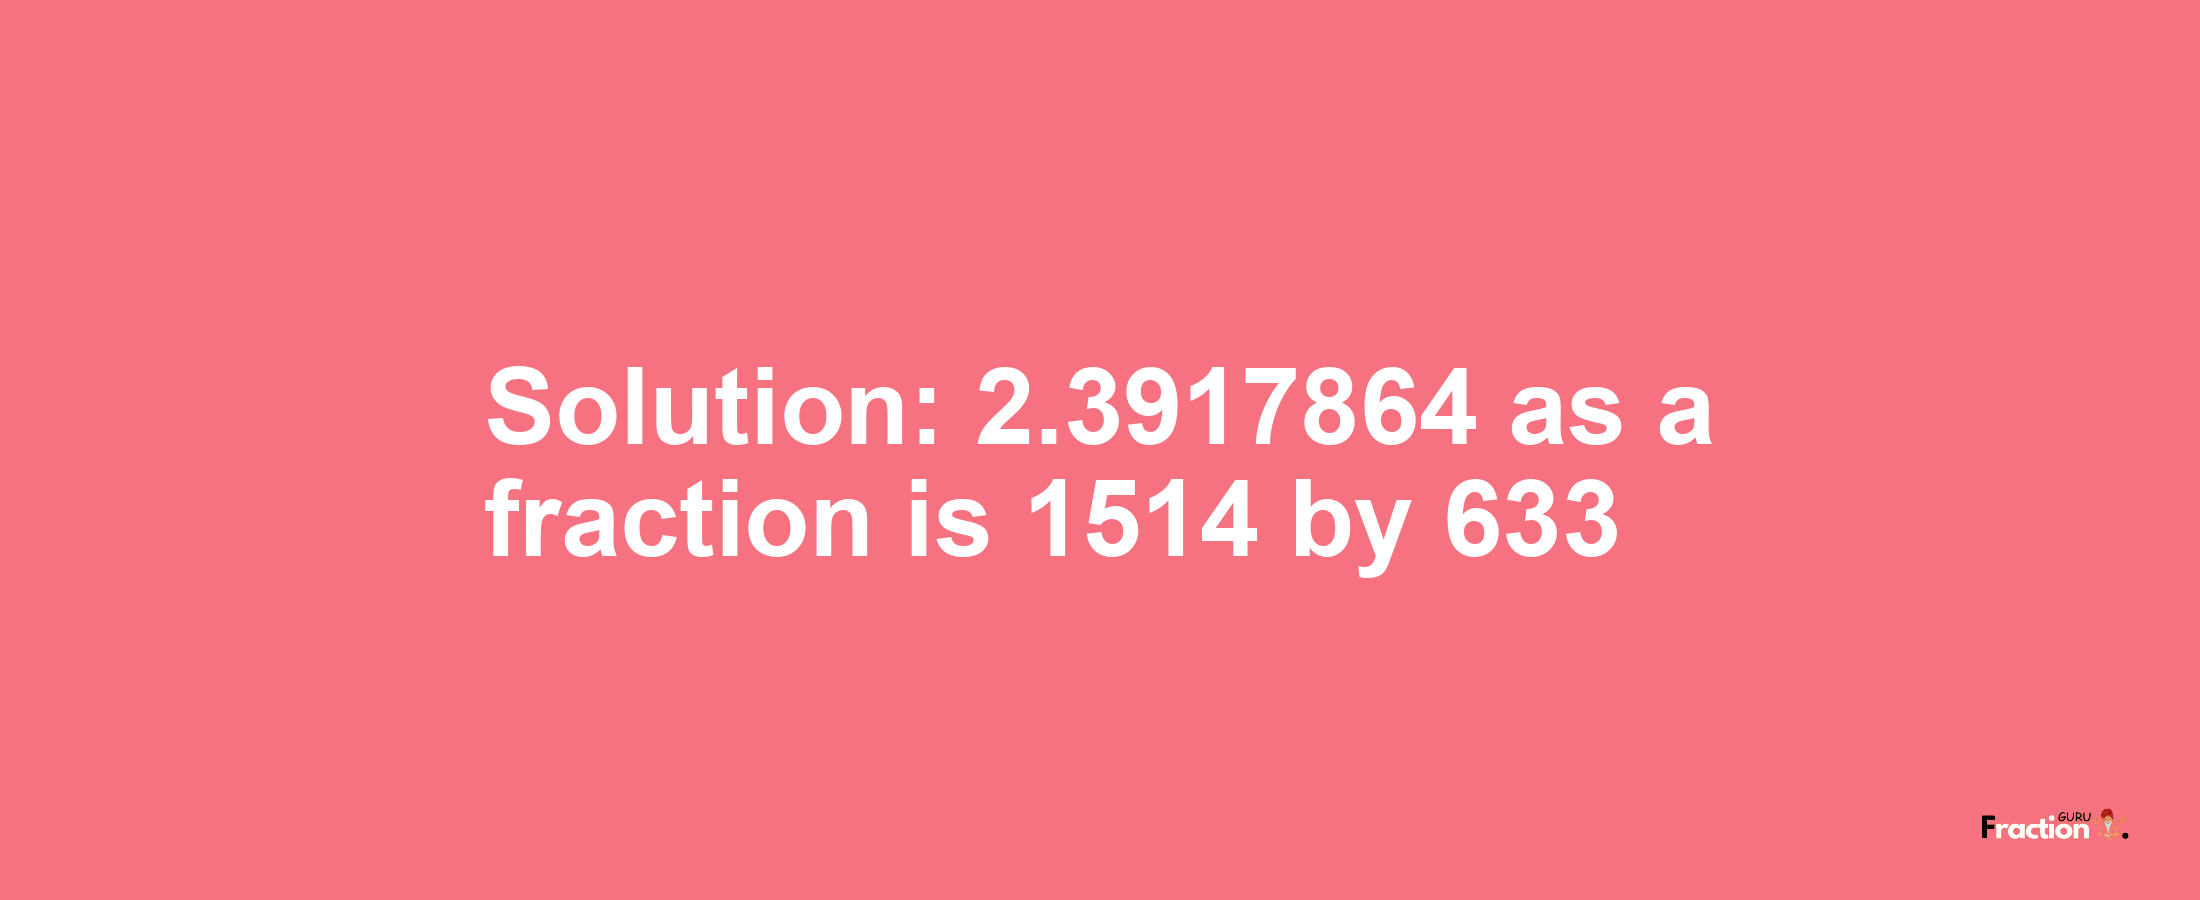 Solution:2.3917864 as a fraction is 1514/633